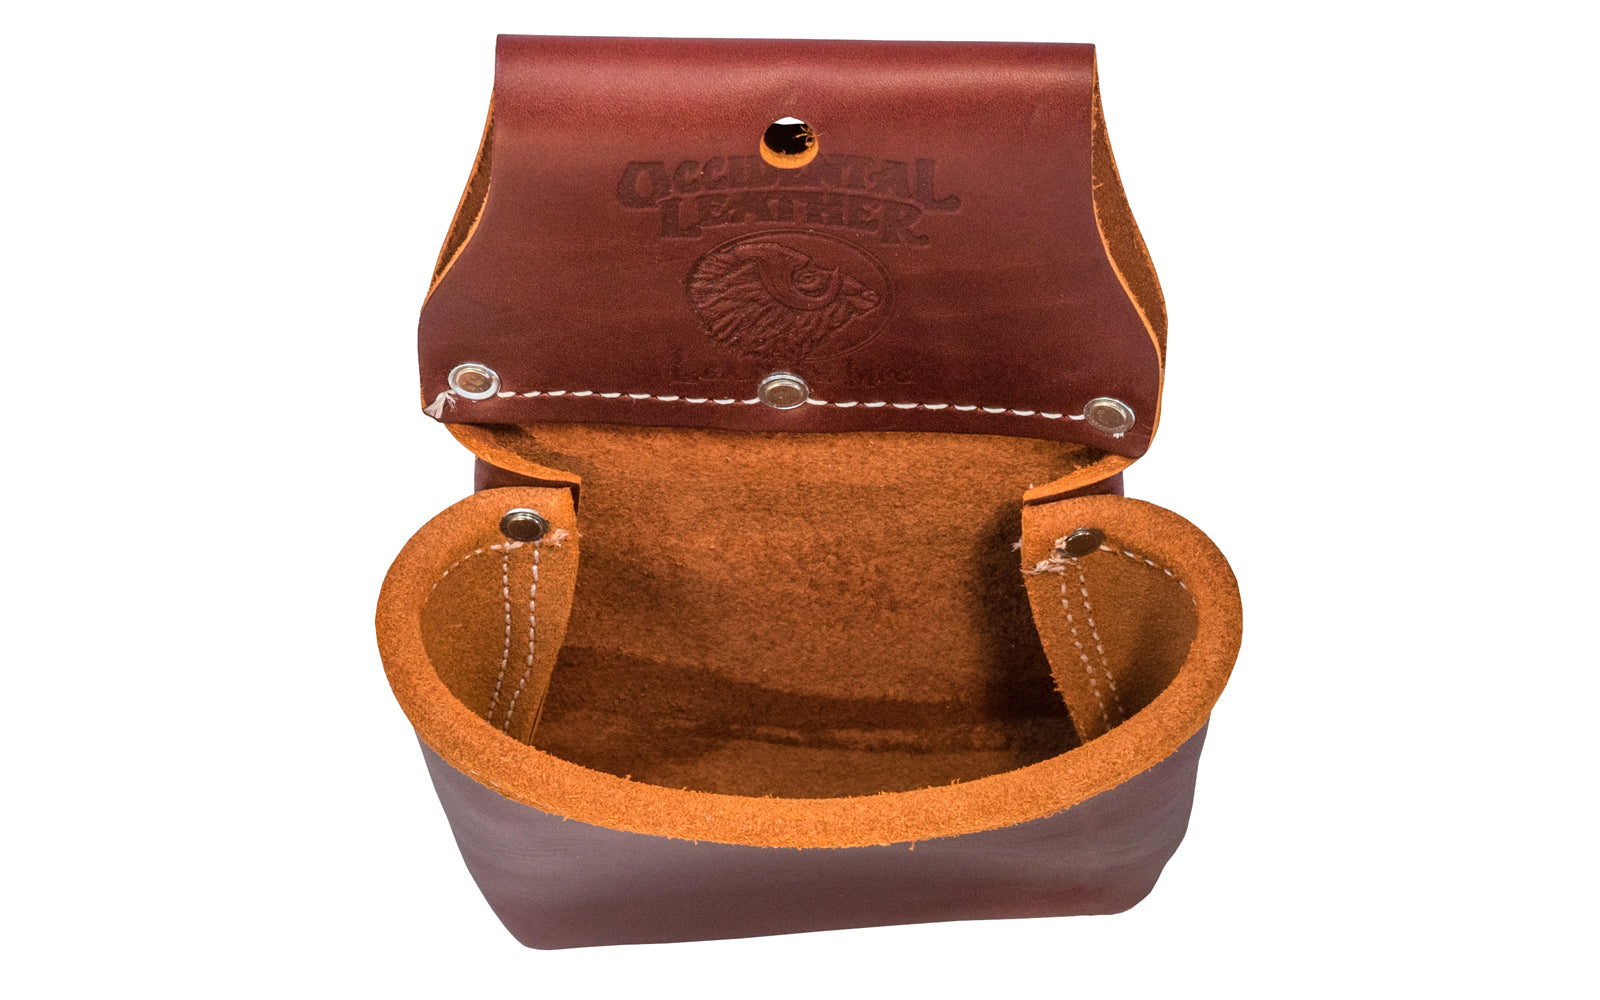 Occidental Leather Large Pouch ~ Model 5019 - Fits a 3" work belt - Pouch - Utility Bag - Made of genuine leather - Made in USA - Single Leather Bag - Tool Bag - 759244007503 - Occidental Leather's single pouch all leather bag. Occidental one pocket bag - One Pouch - Compact pouch. No tool holders. Small